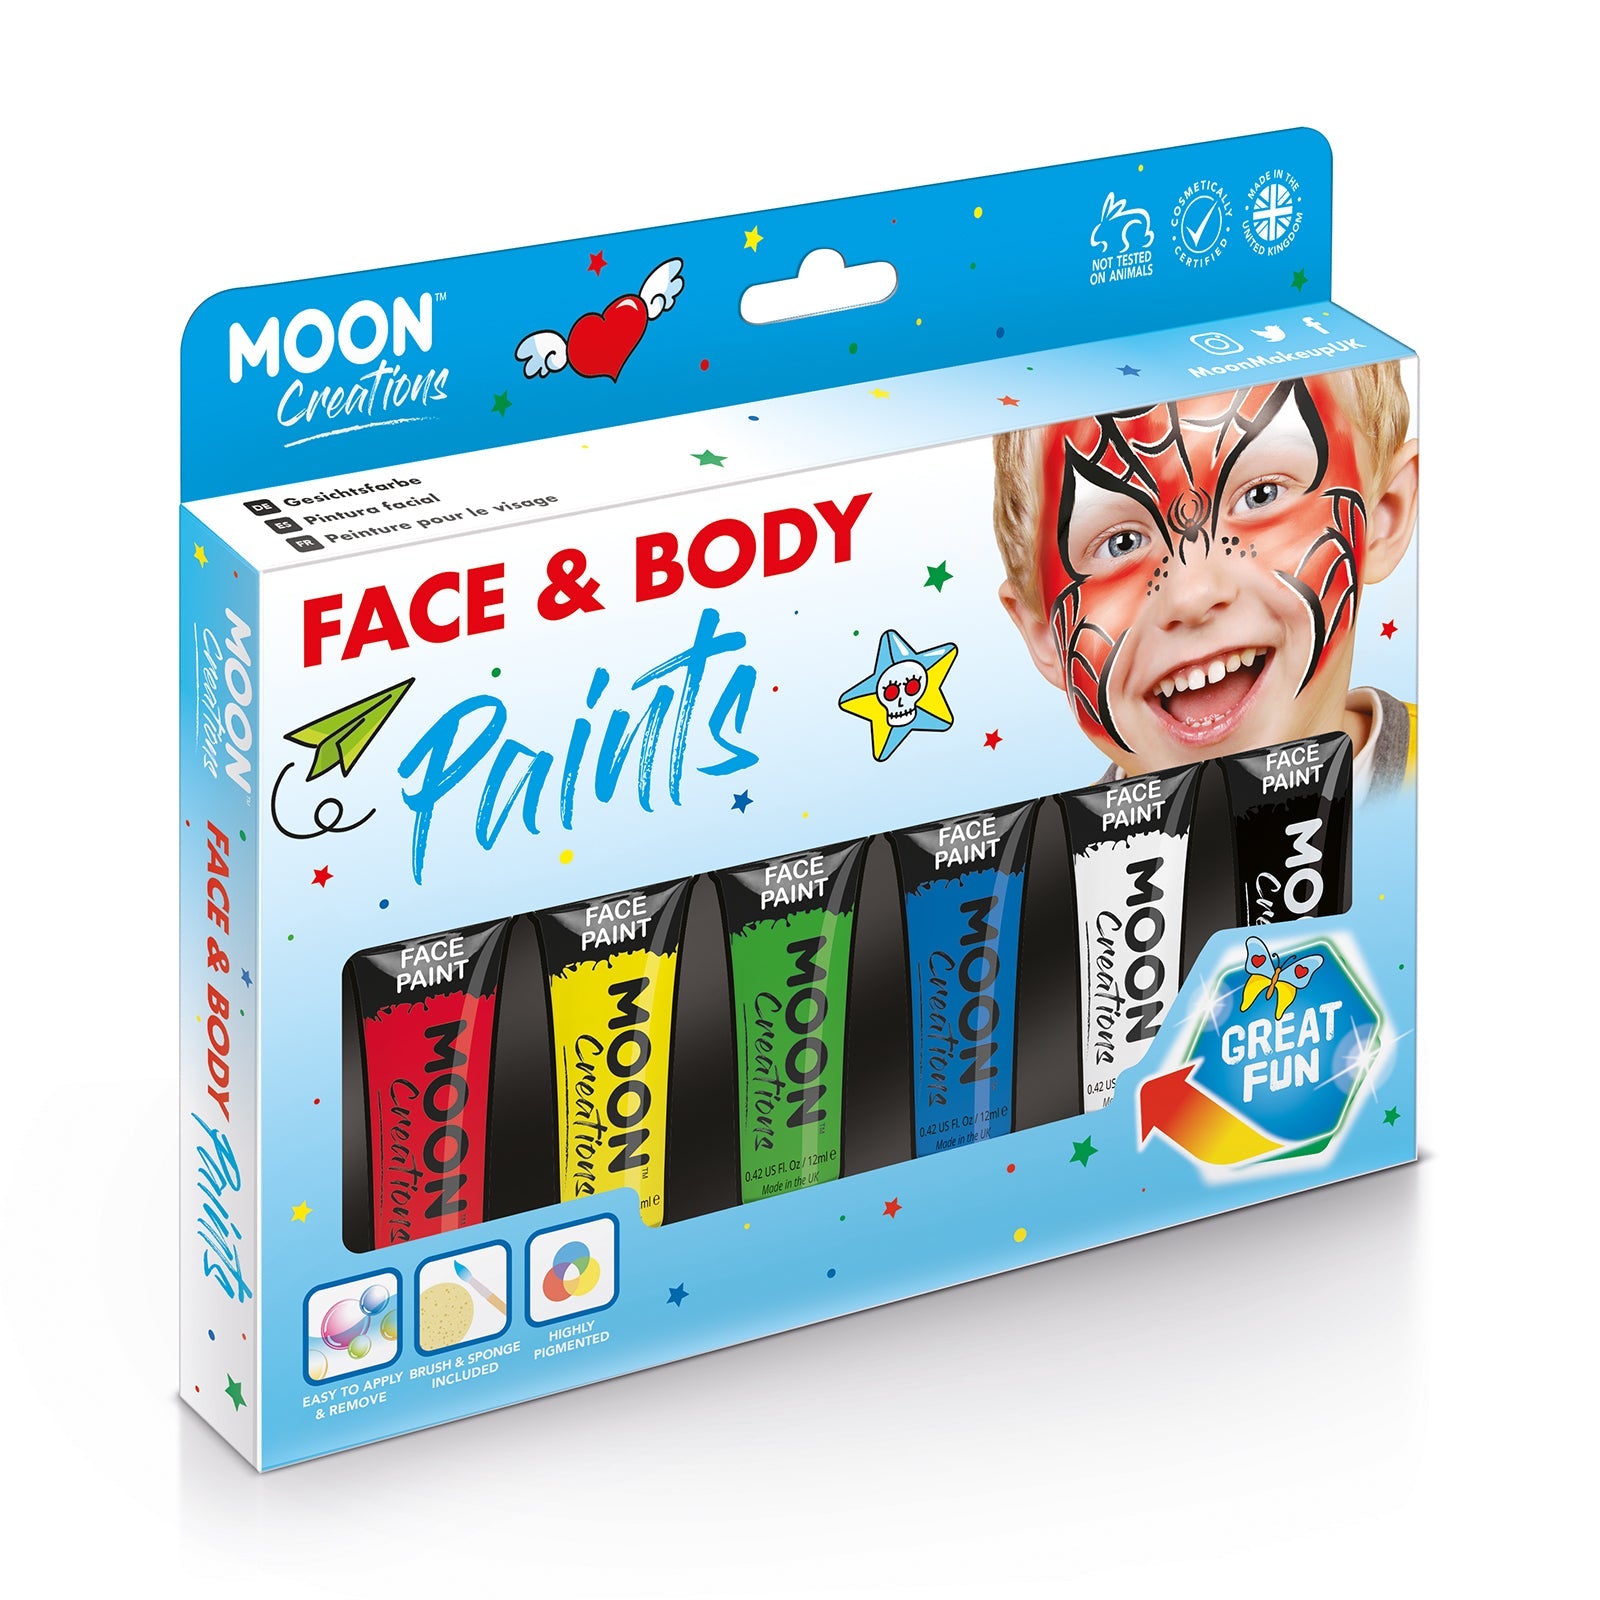 Face & Body Paint Makeup Primary Colours Boxset - 6 tubes, brush, spong. Cosmetically certified, FDA & Health Canada compliant, cruelty free and vegan.